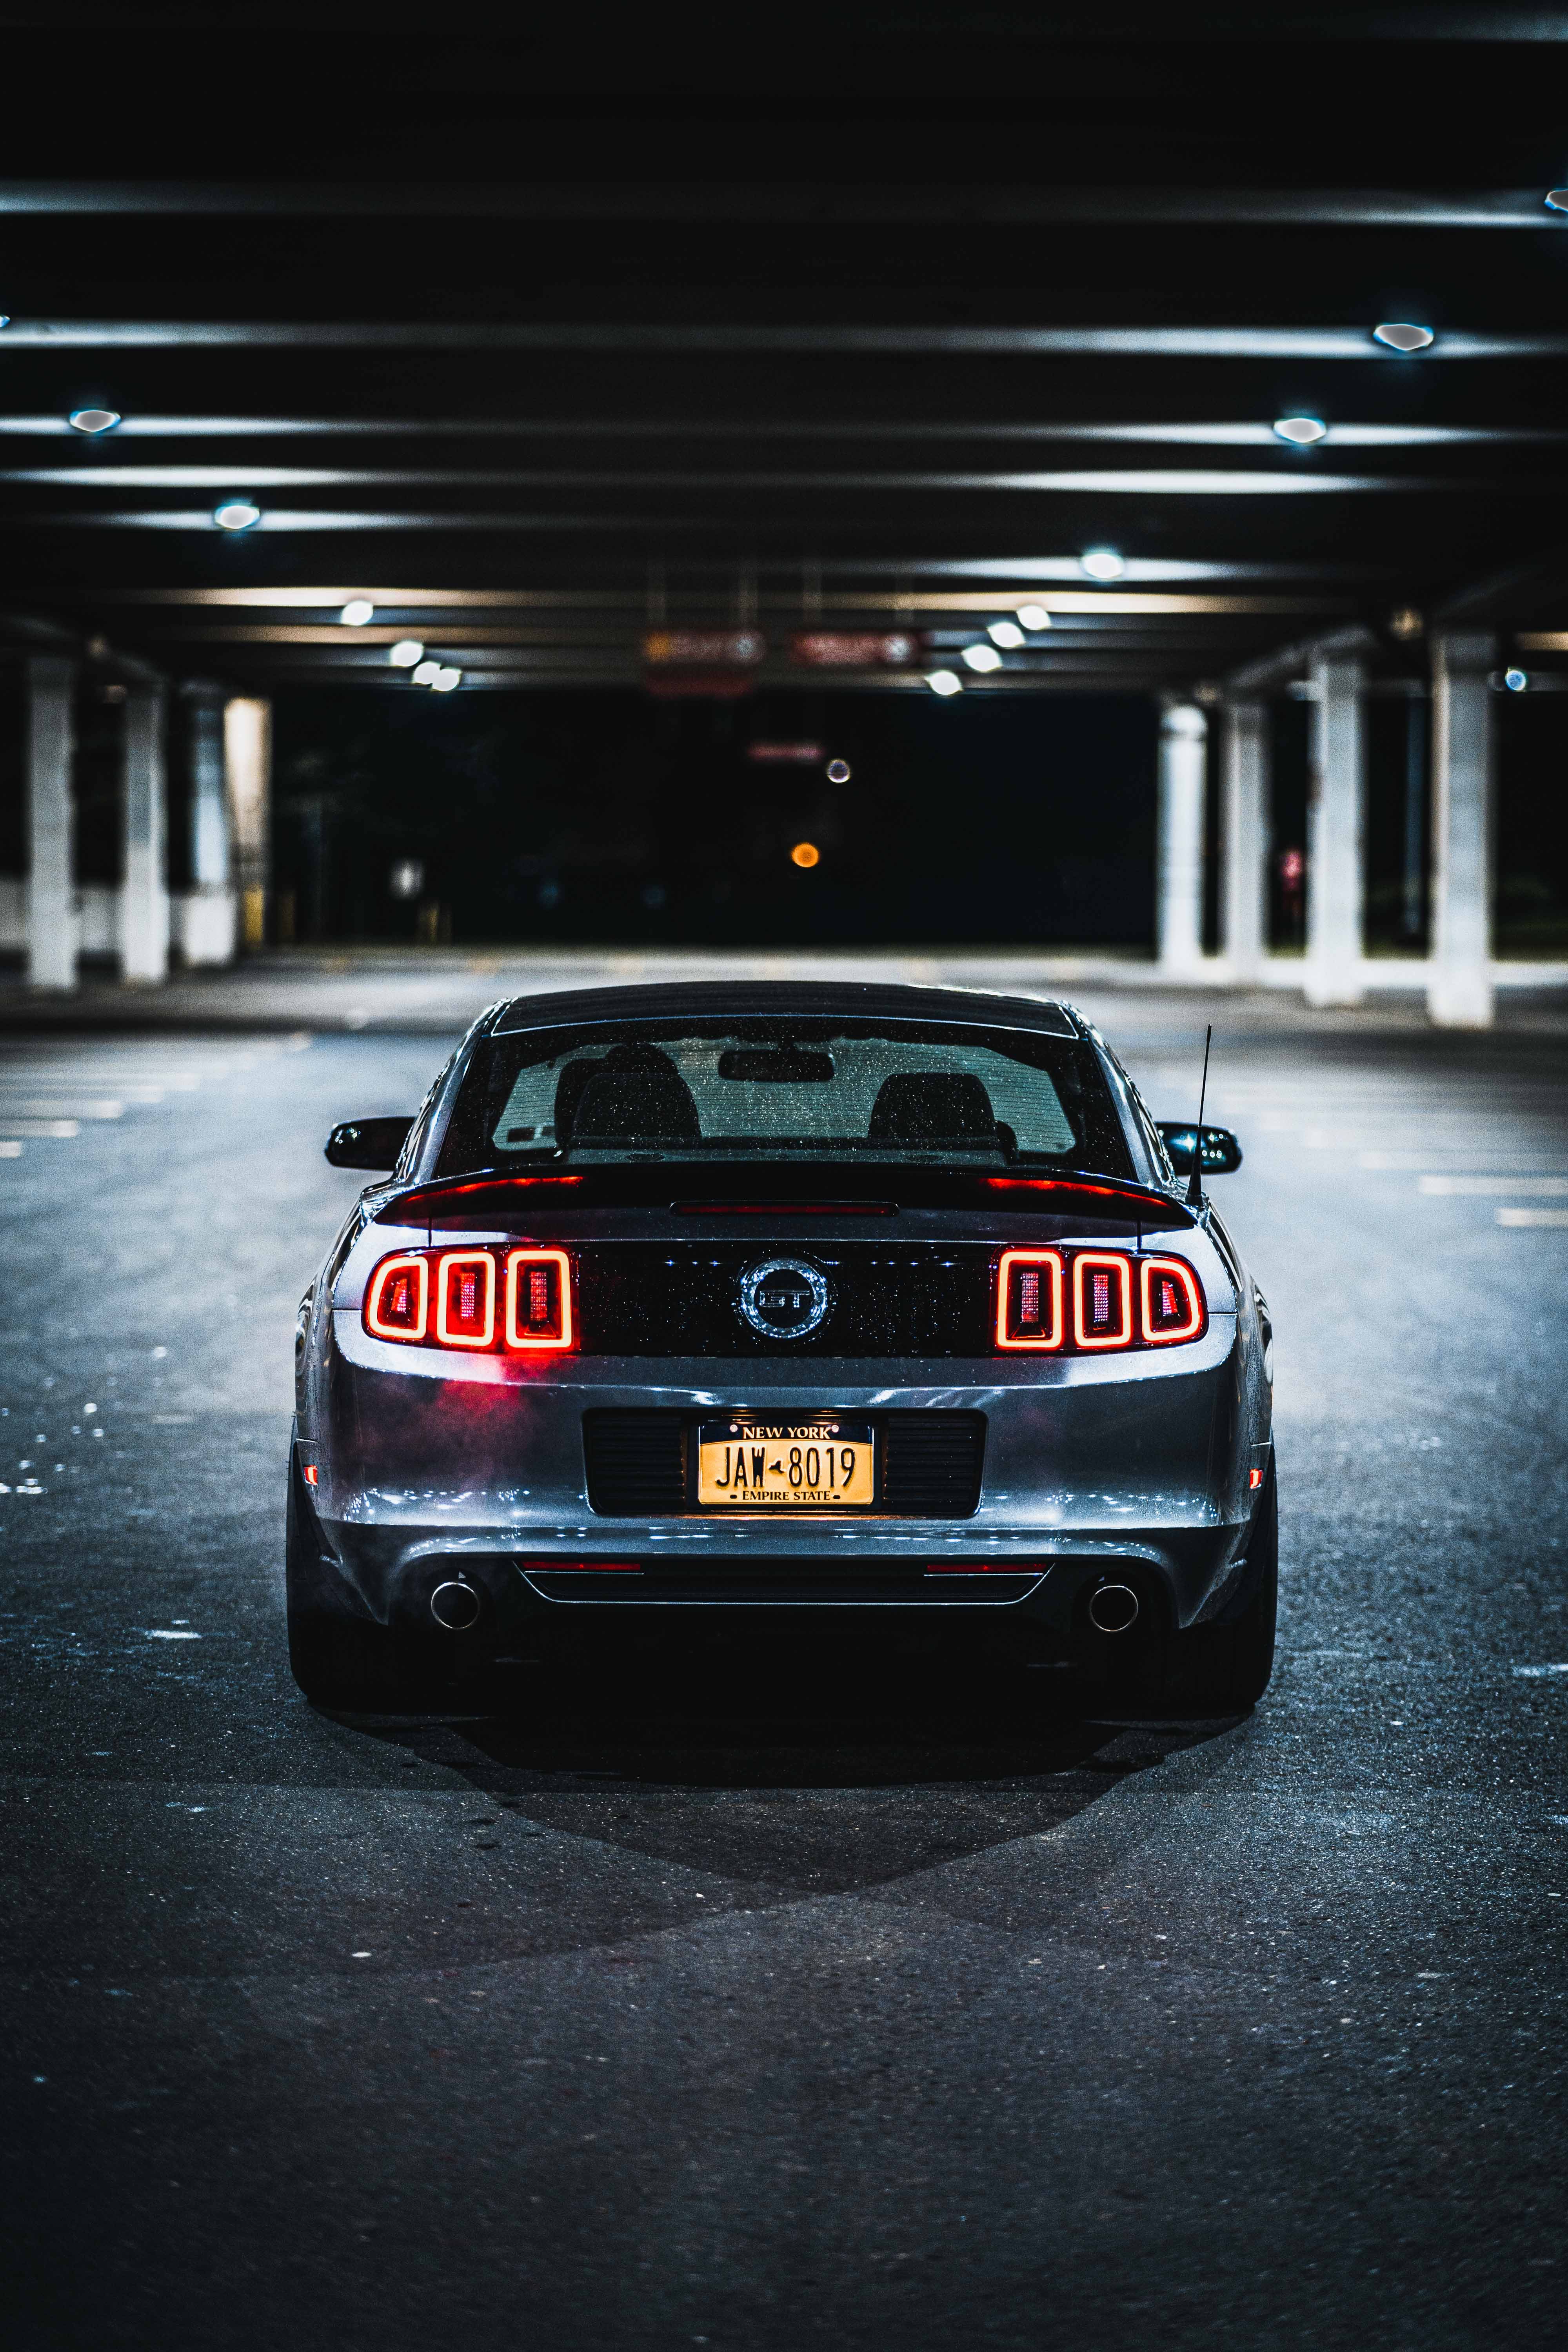 ford mustang, ford mustang gt, cars, lights, back view, rear view, headlights